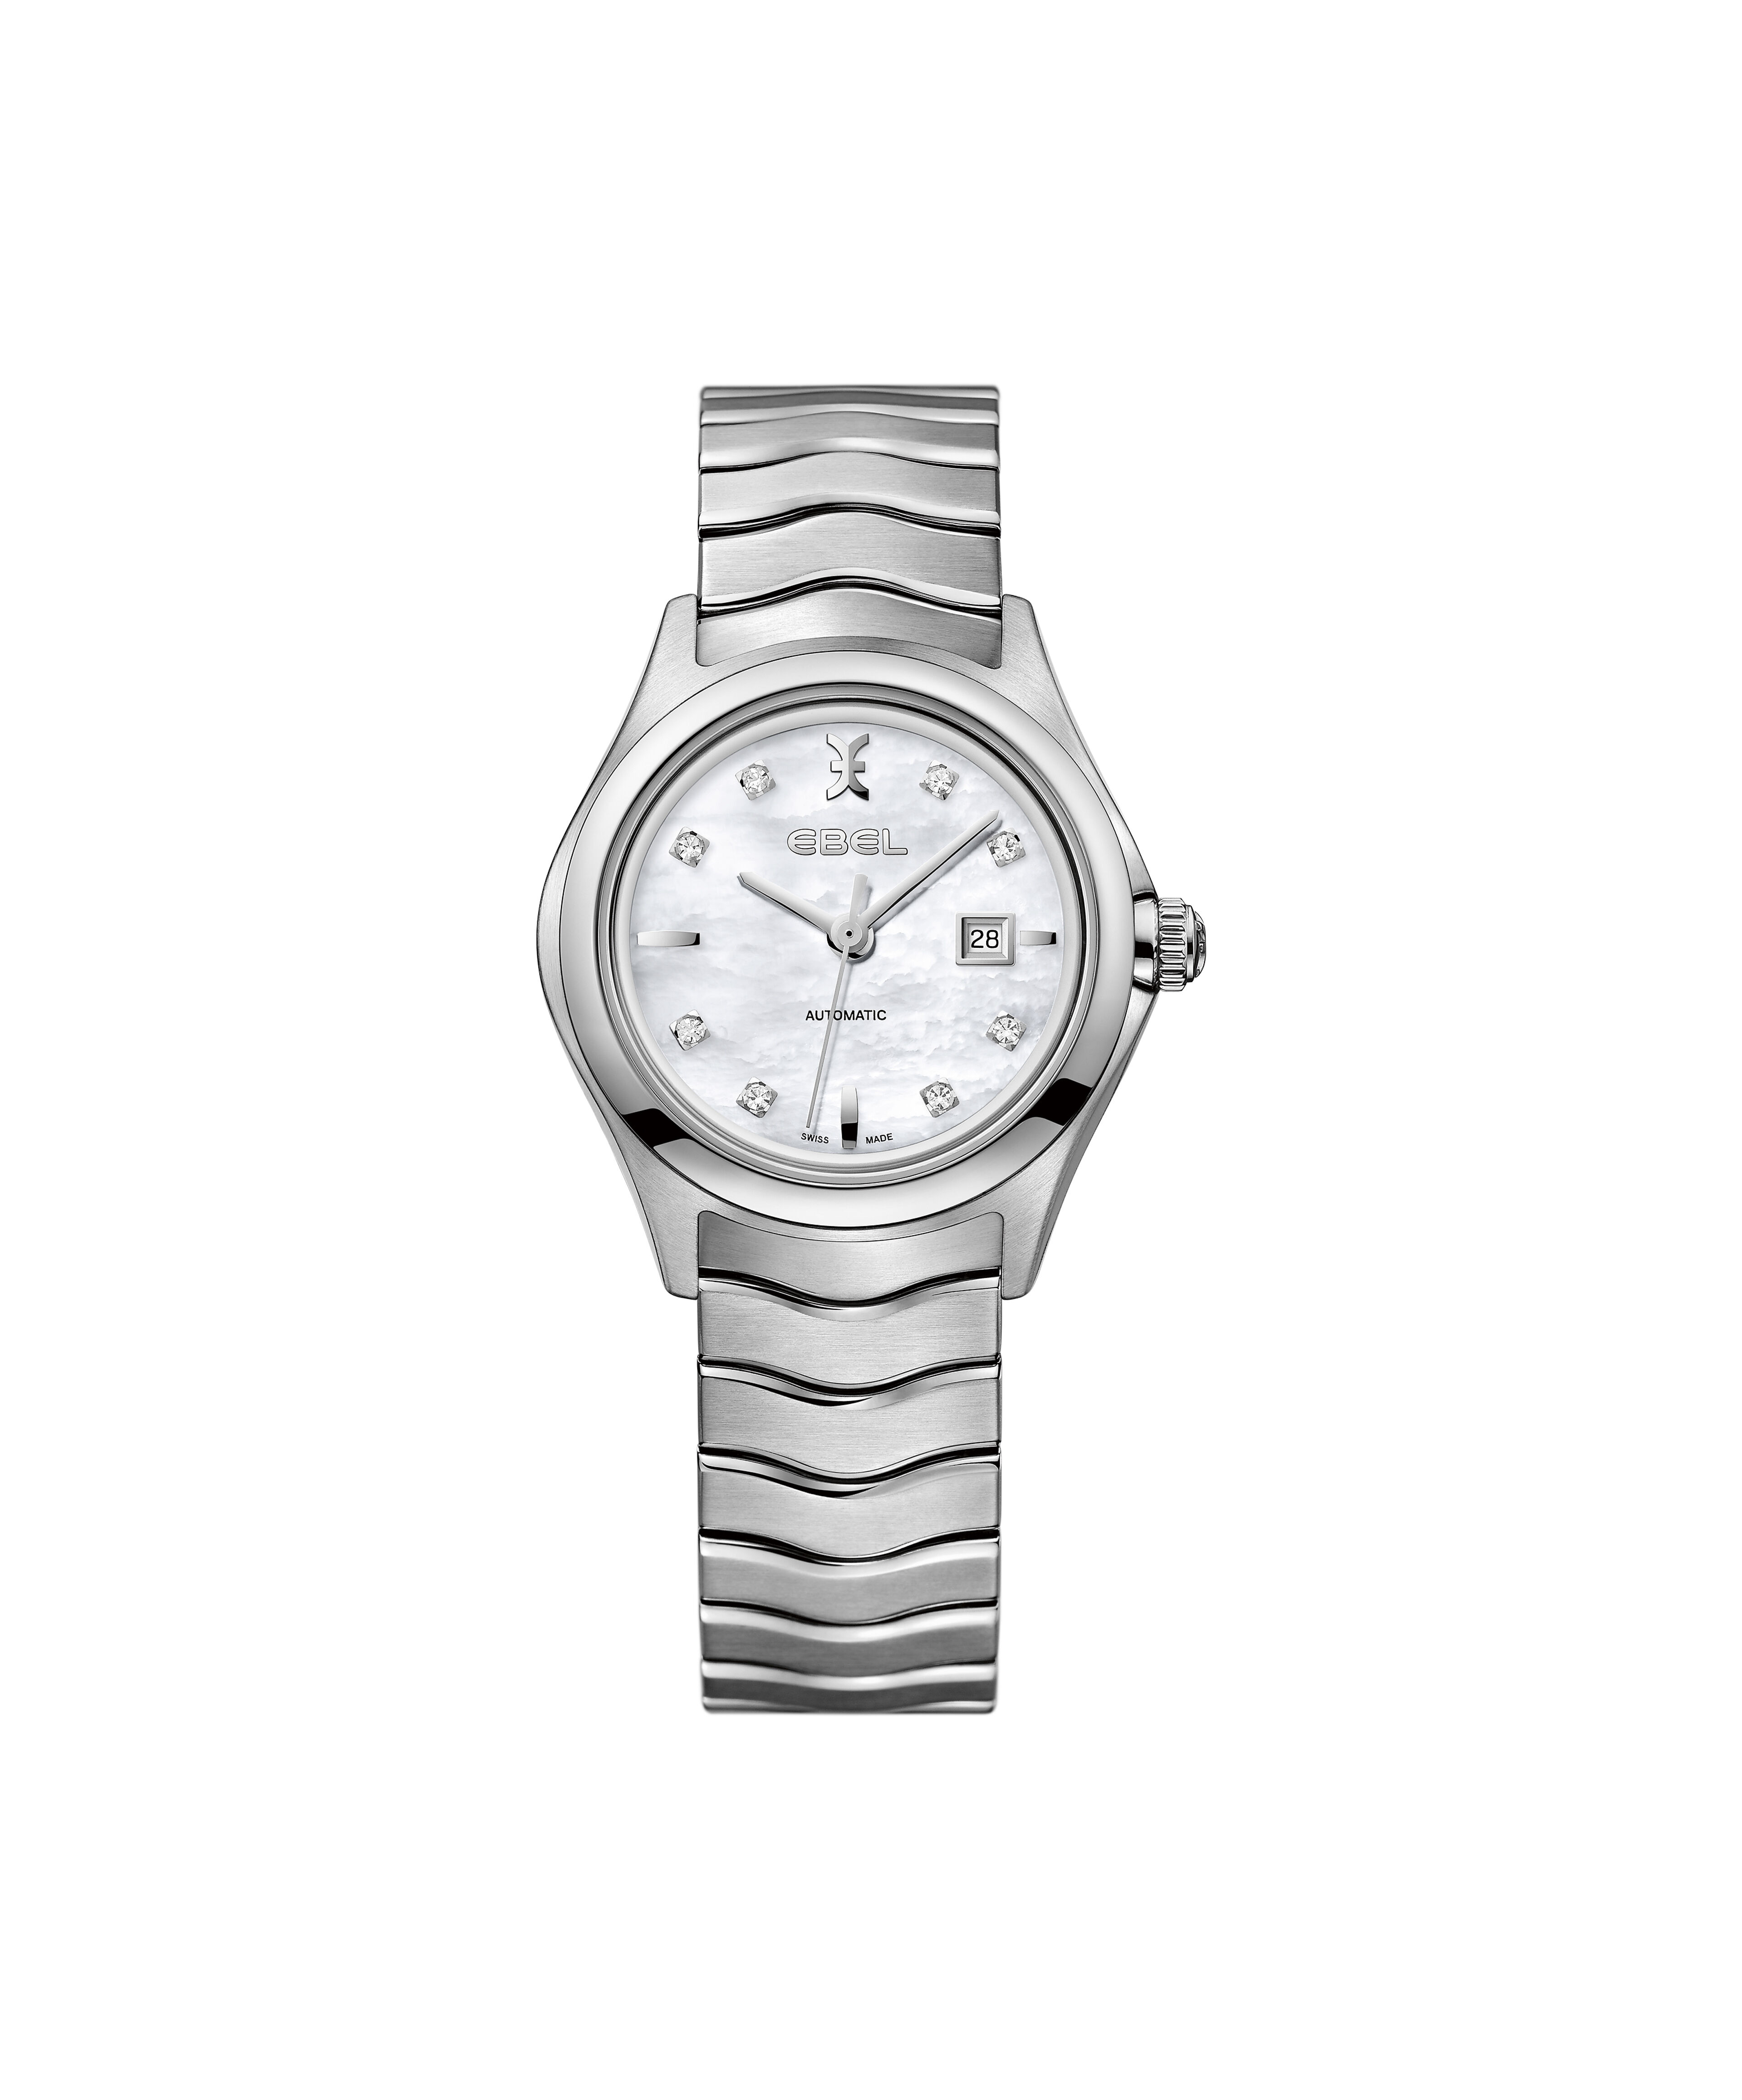 Replica Tag Heuer Watches For Men